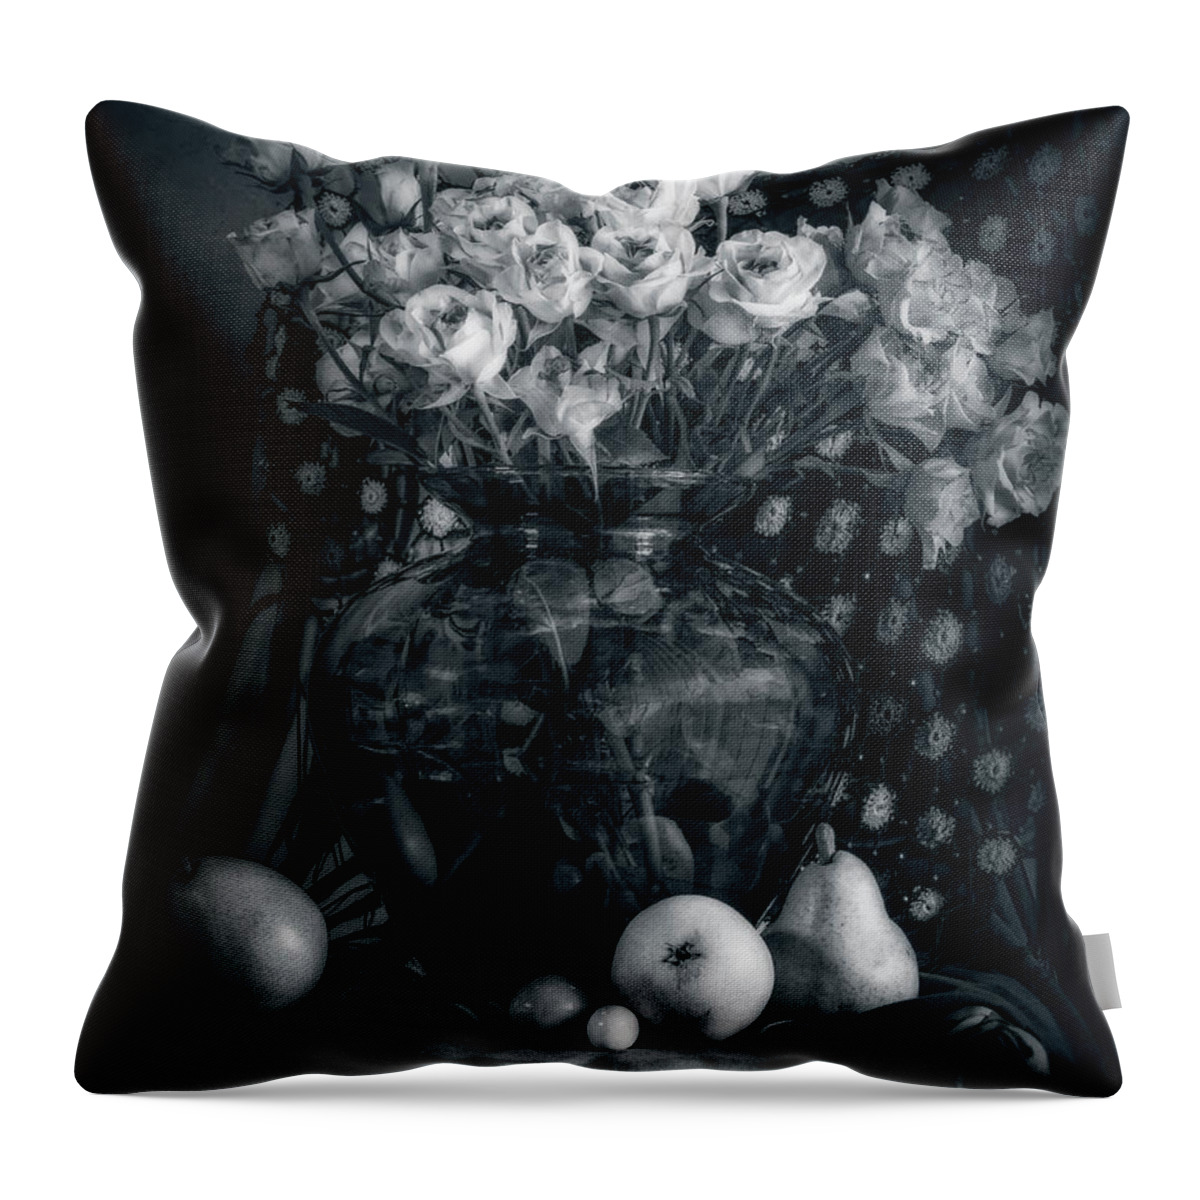 Vintage Throw Pillow featuring the photograph Vintage Roses #1 by Sandra Selle Rodriguez